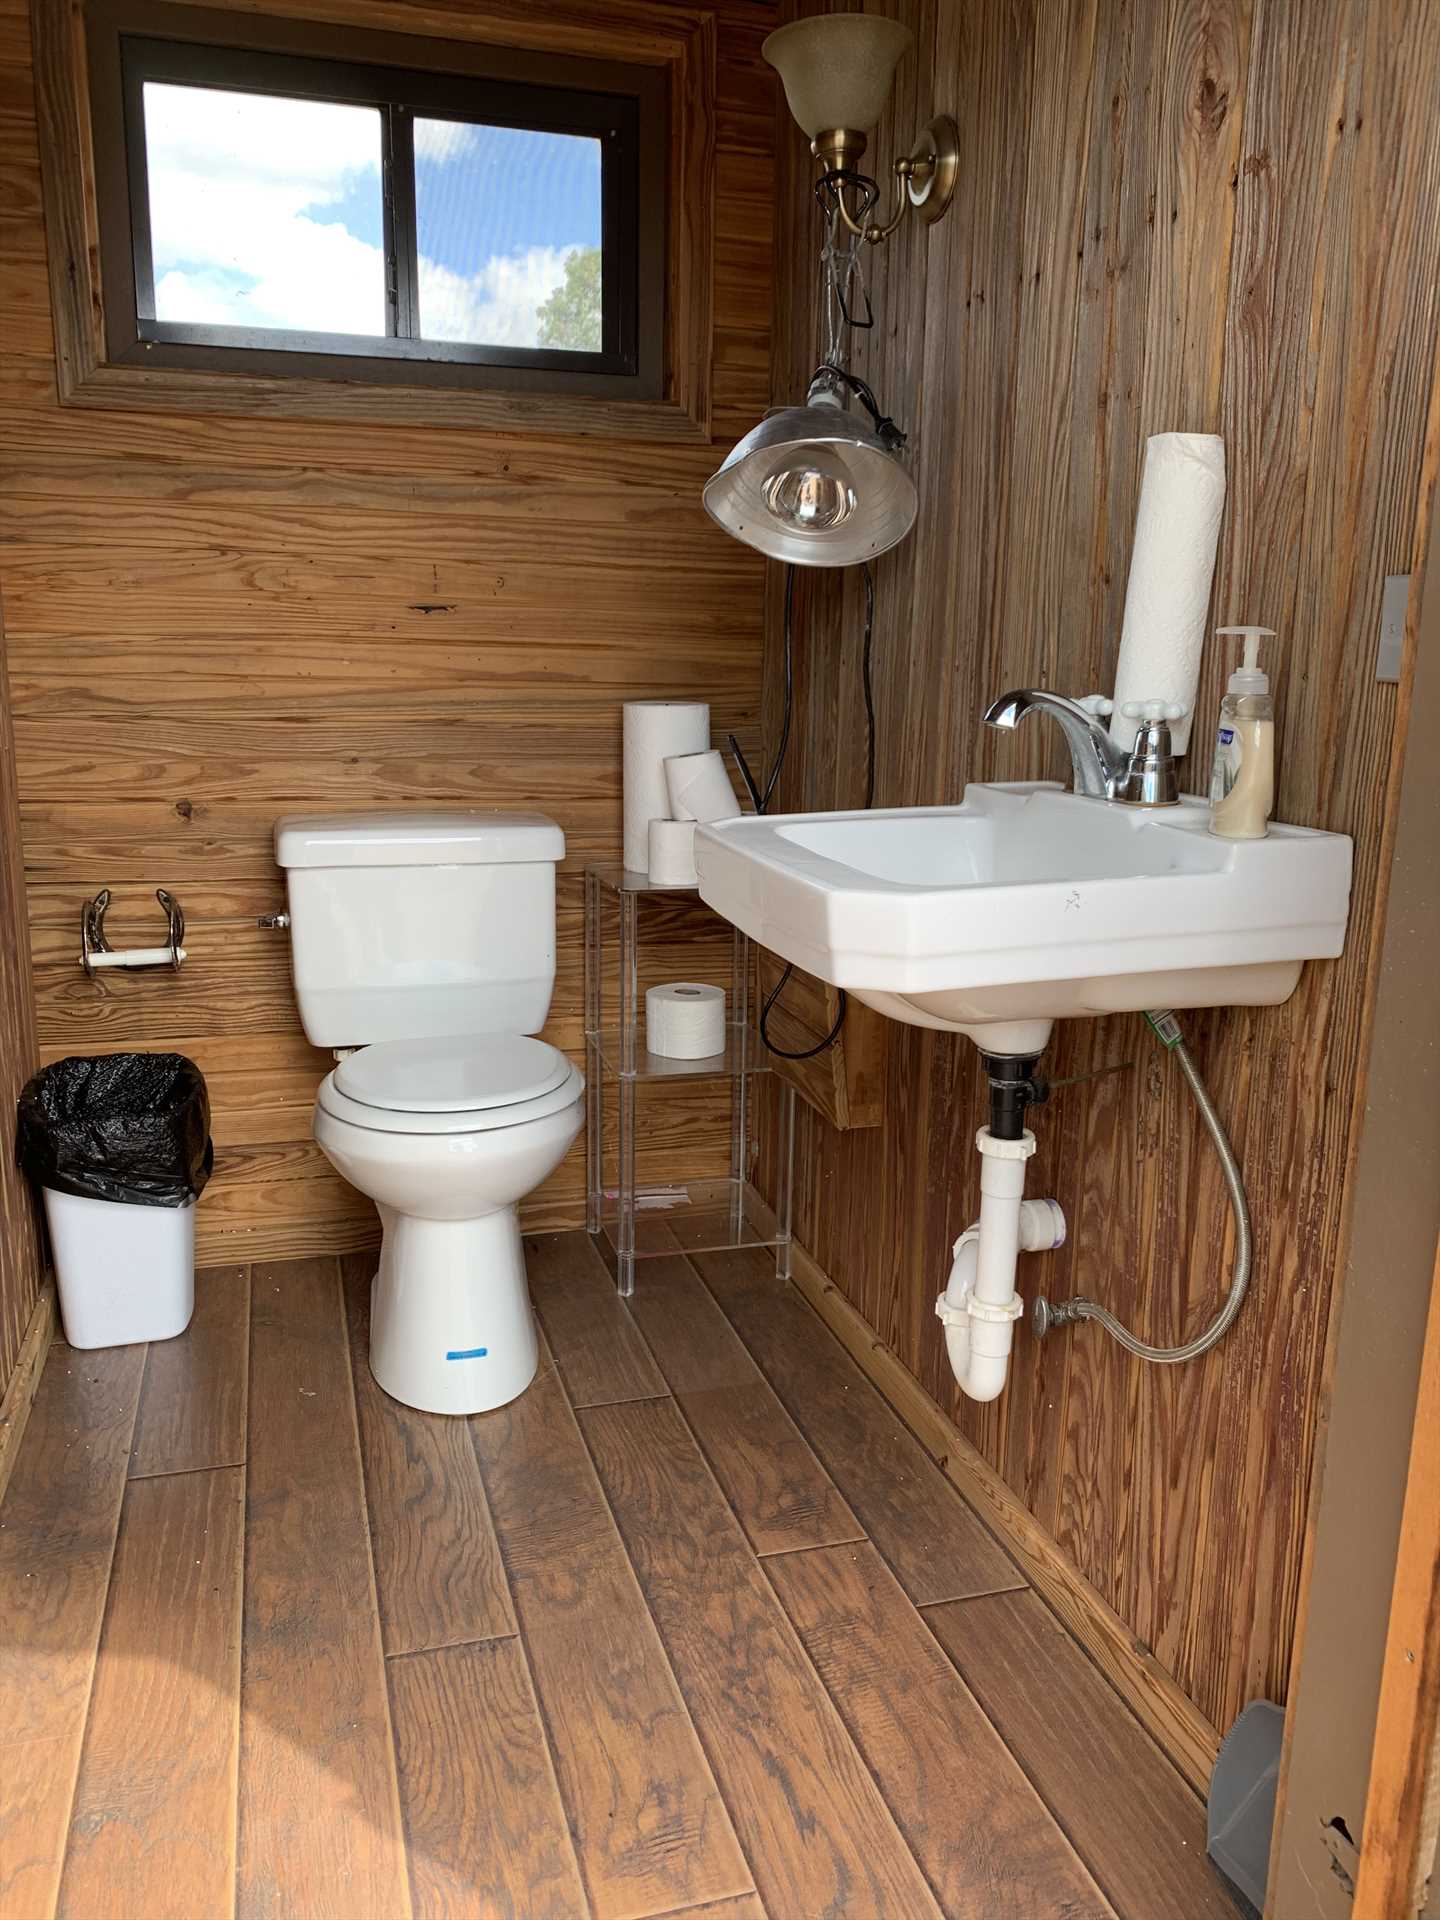                                                 A shared outhouse (with modern updates, of course) is on the grounds for guests who don't necessarily want to return to their cabins.